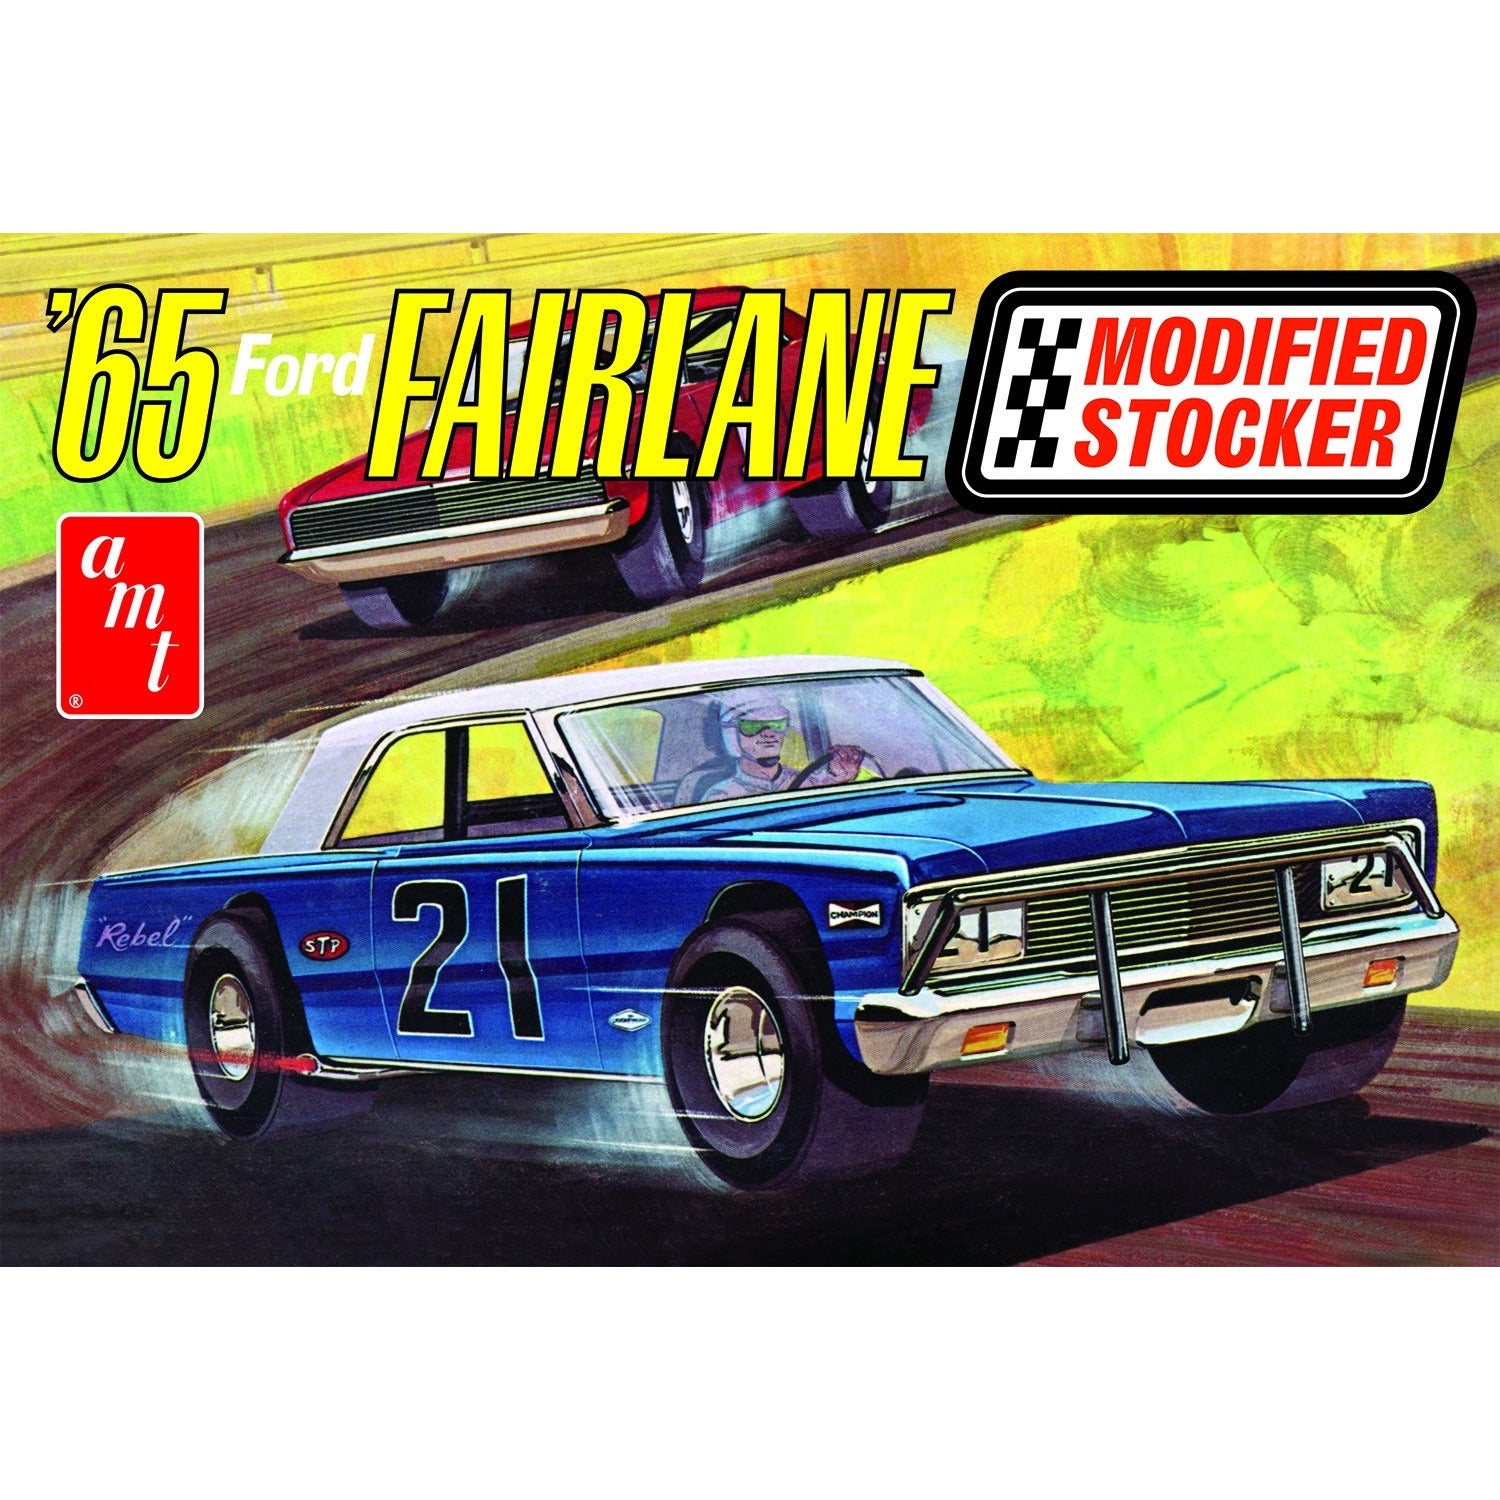 1965 Ford Fairlane Modified Stocker 1/25 Model Car Kit by AMT